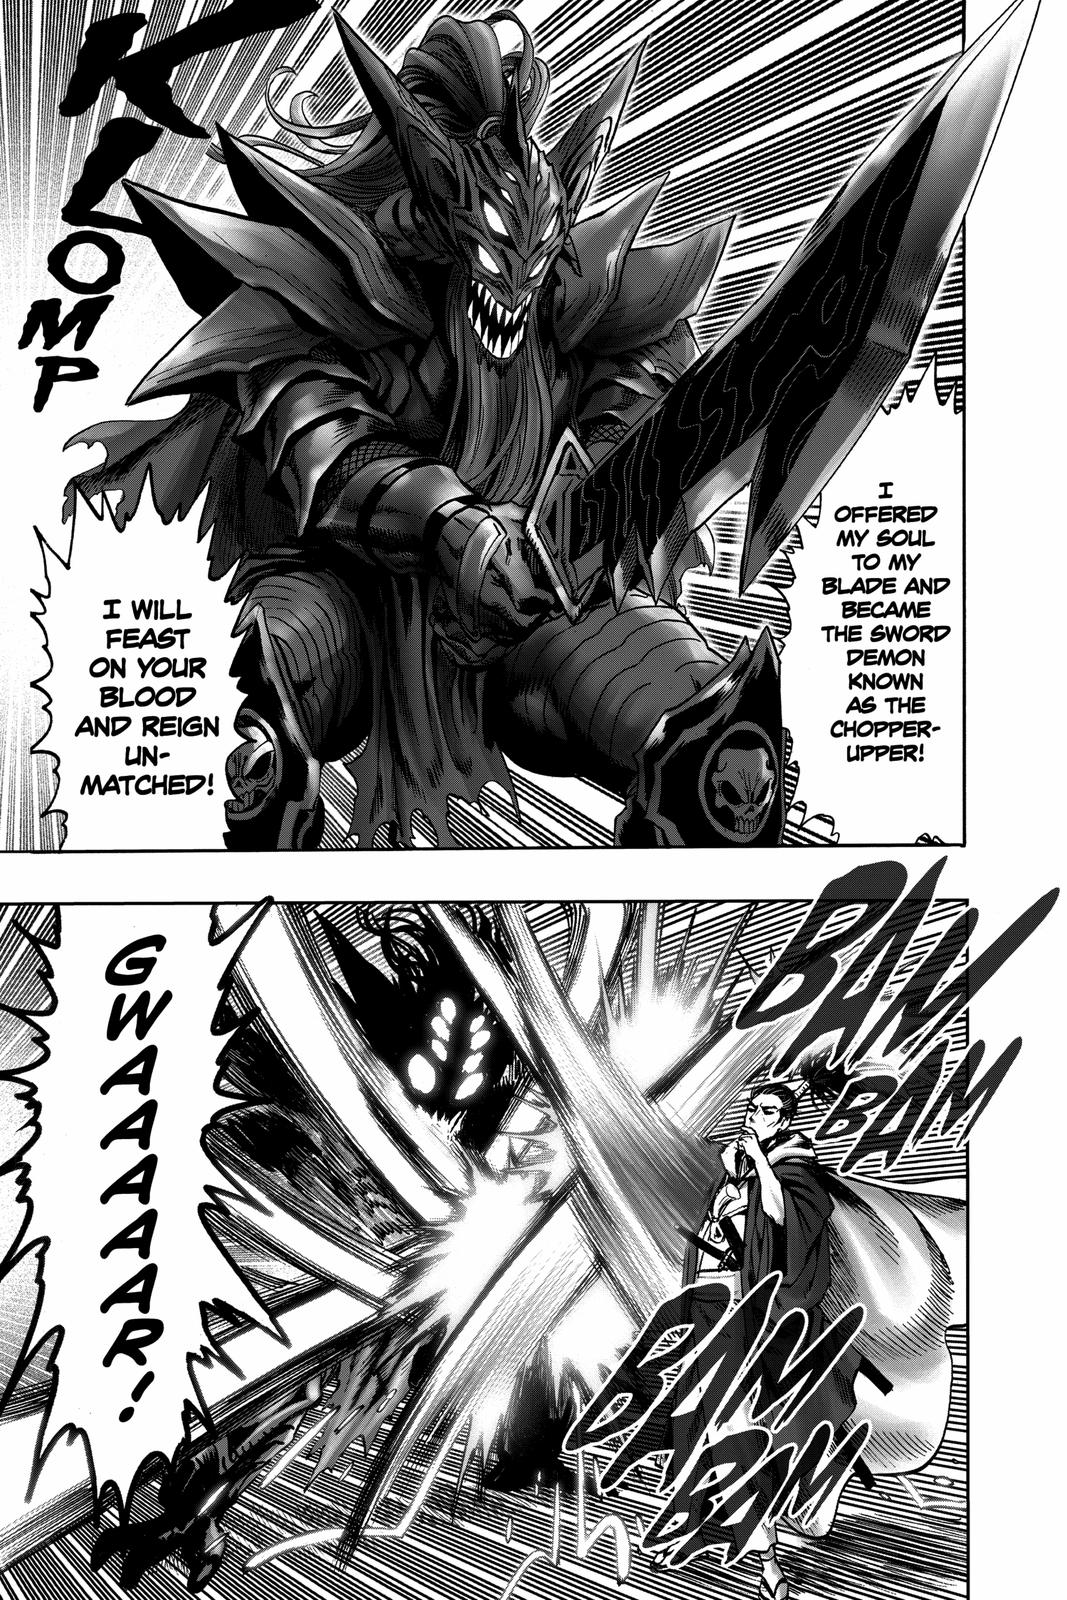 One-Punch Man, Punch 108 image 08